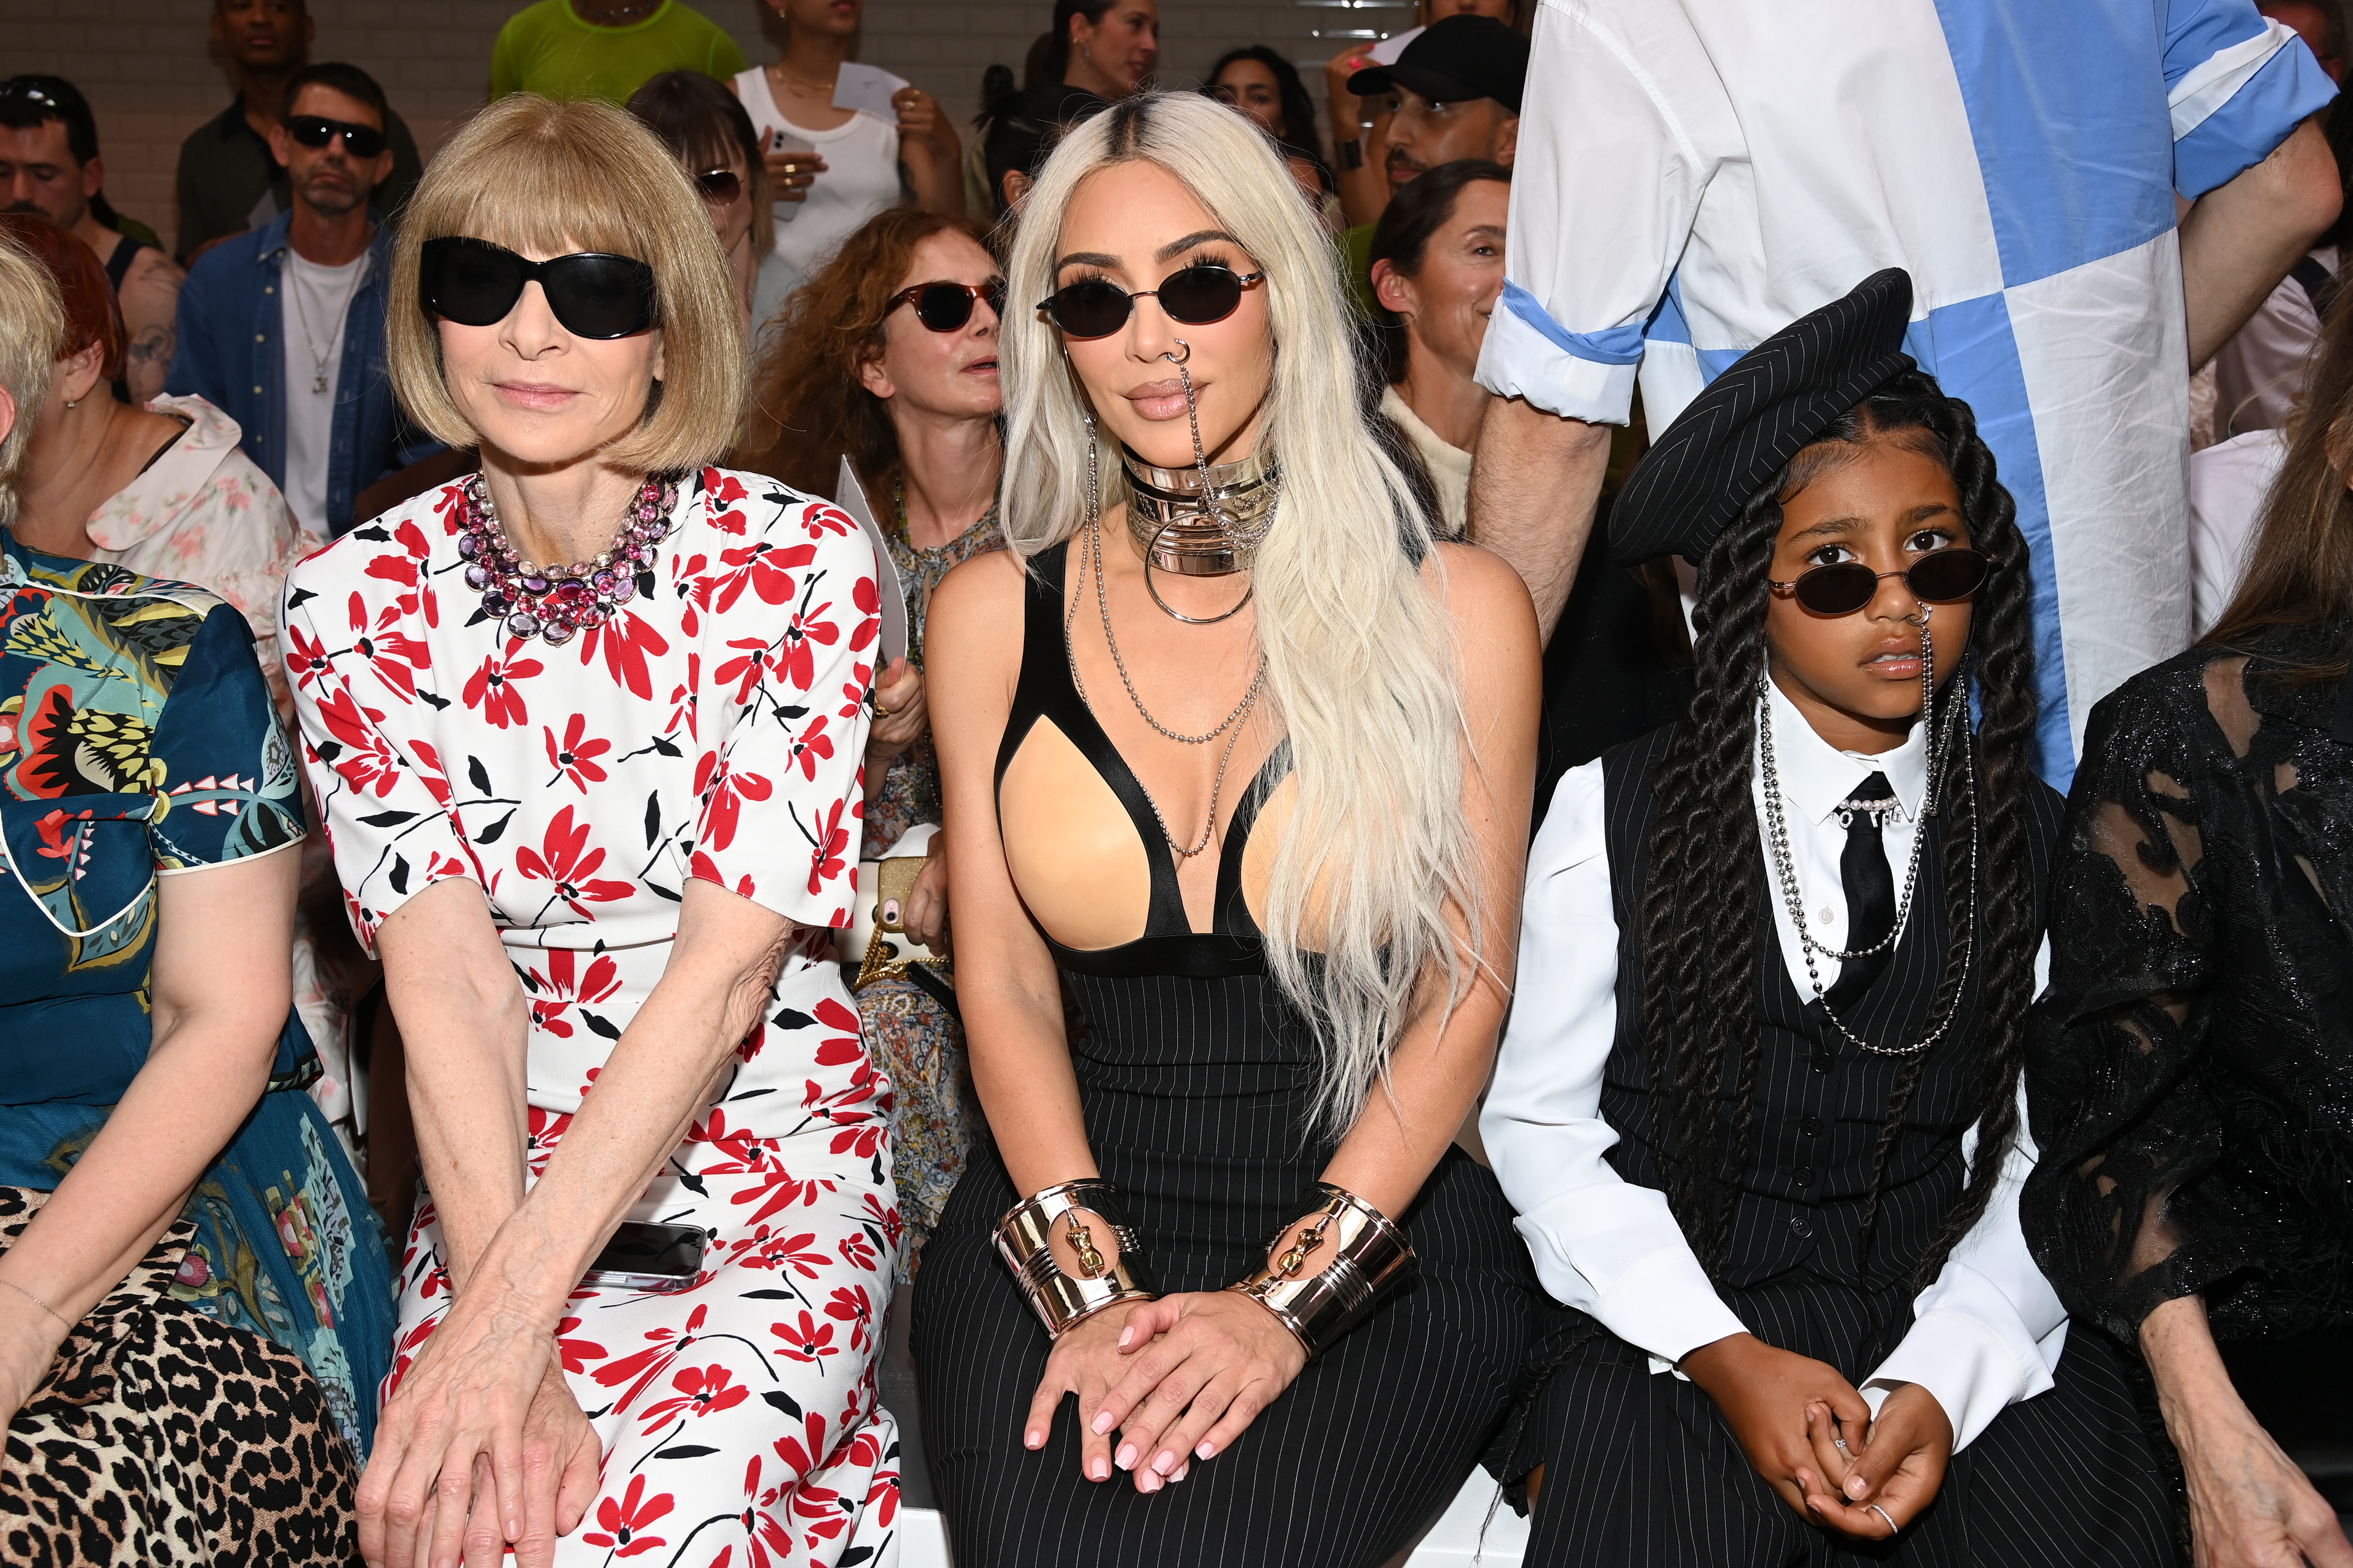 Anna Wintour, Kim, and North sitting together at a runway show